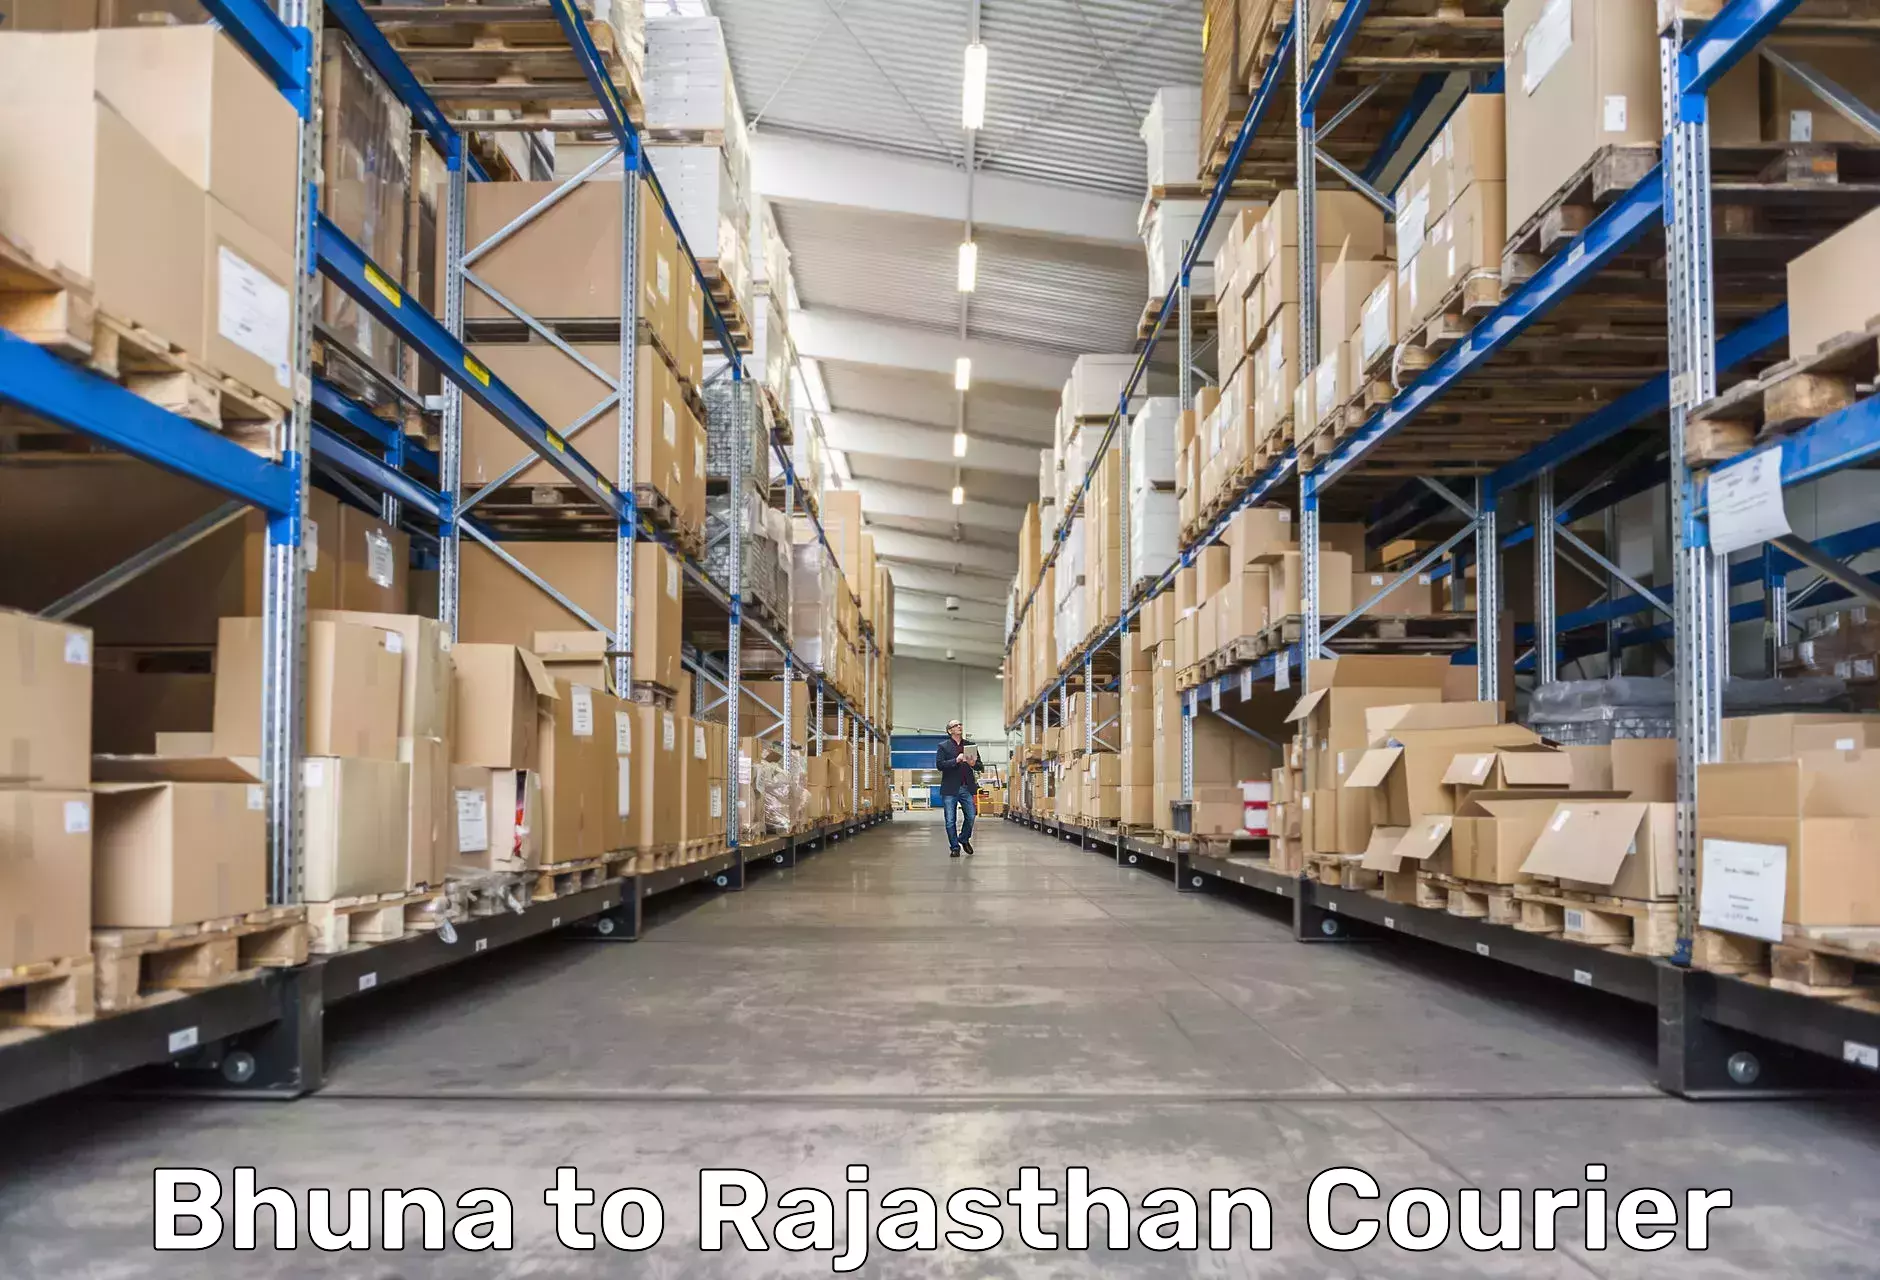 International courier networks Bhuna to Rajasthan